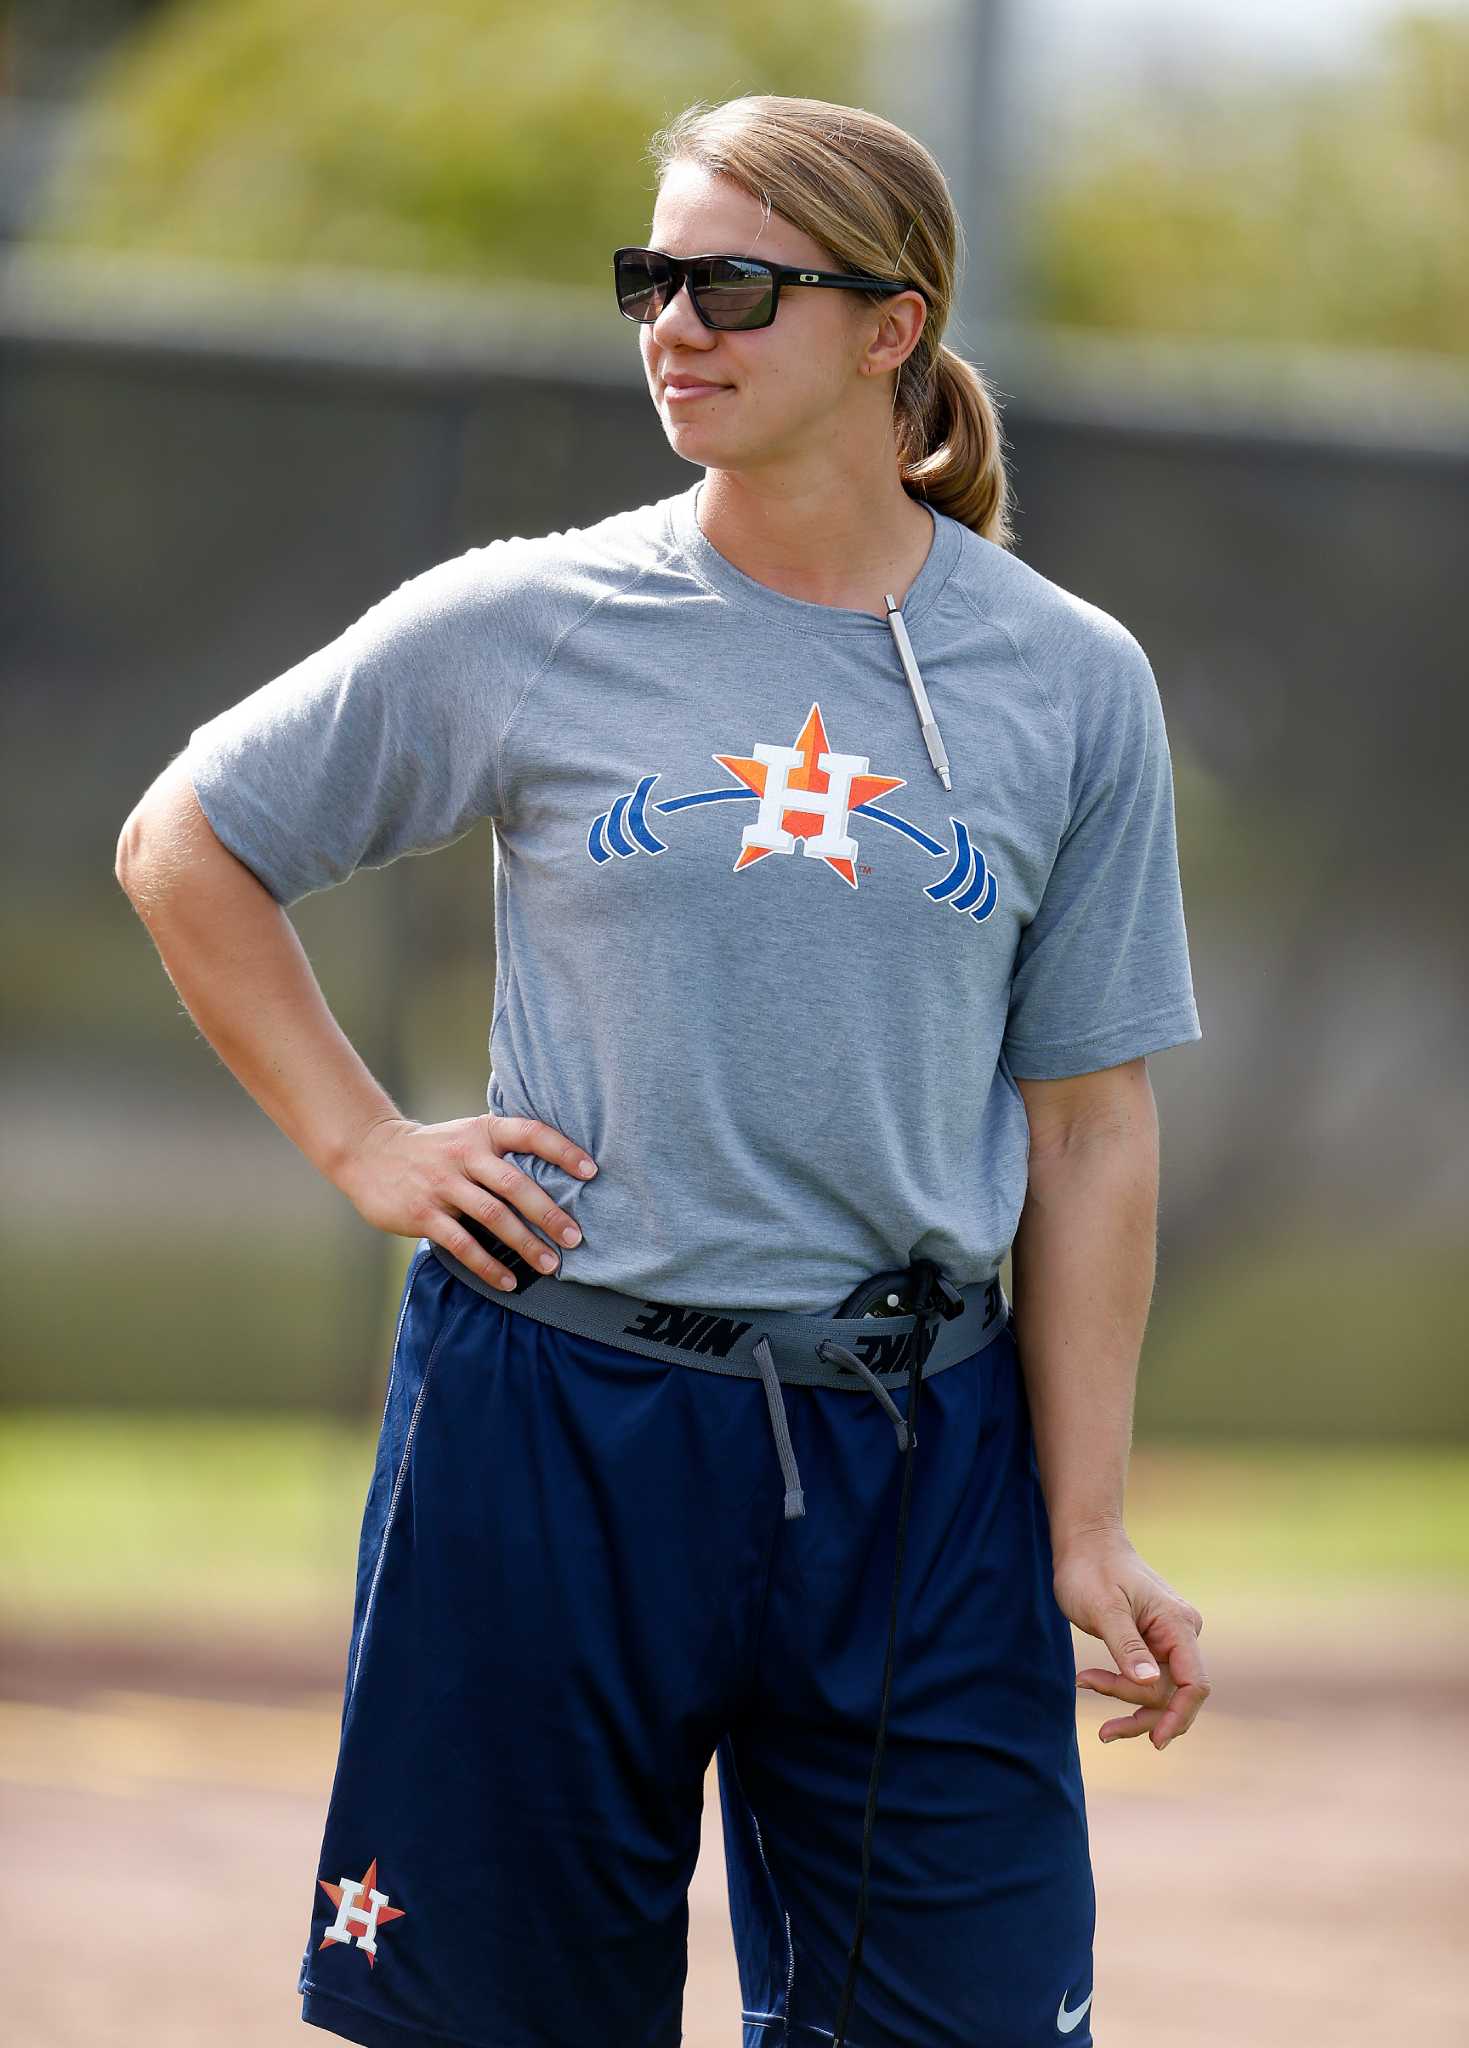 What Rachel Balkovec said about the Astros in her introductory